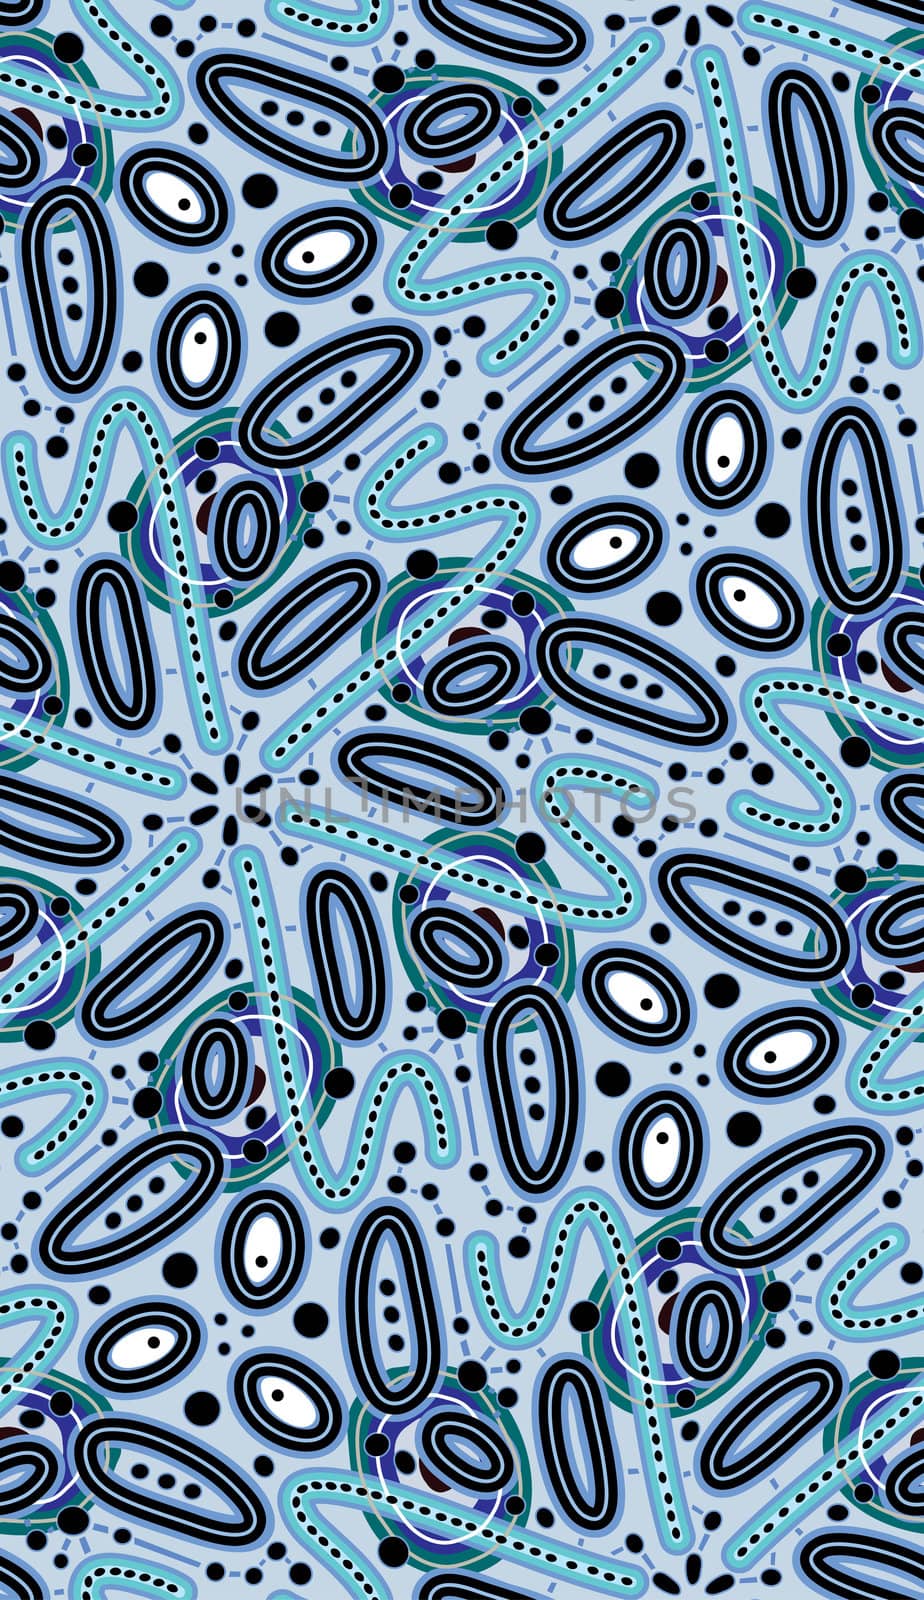 Abstract blue eyes and blue lines in seamless background pattern